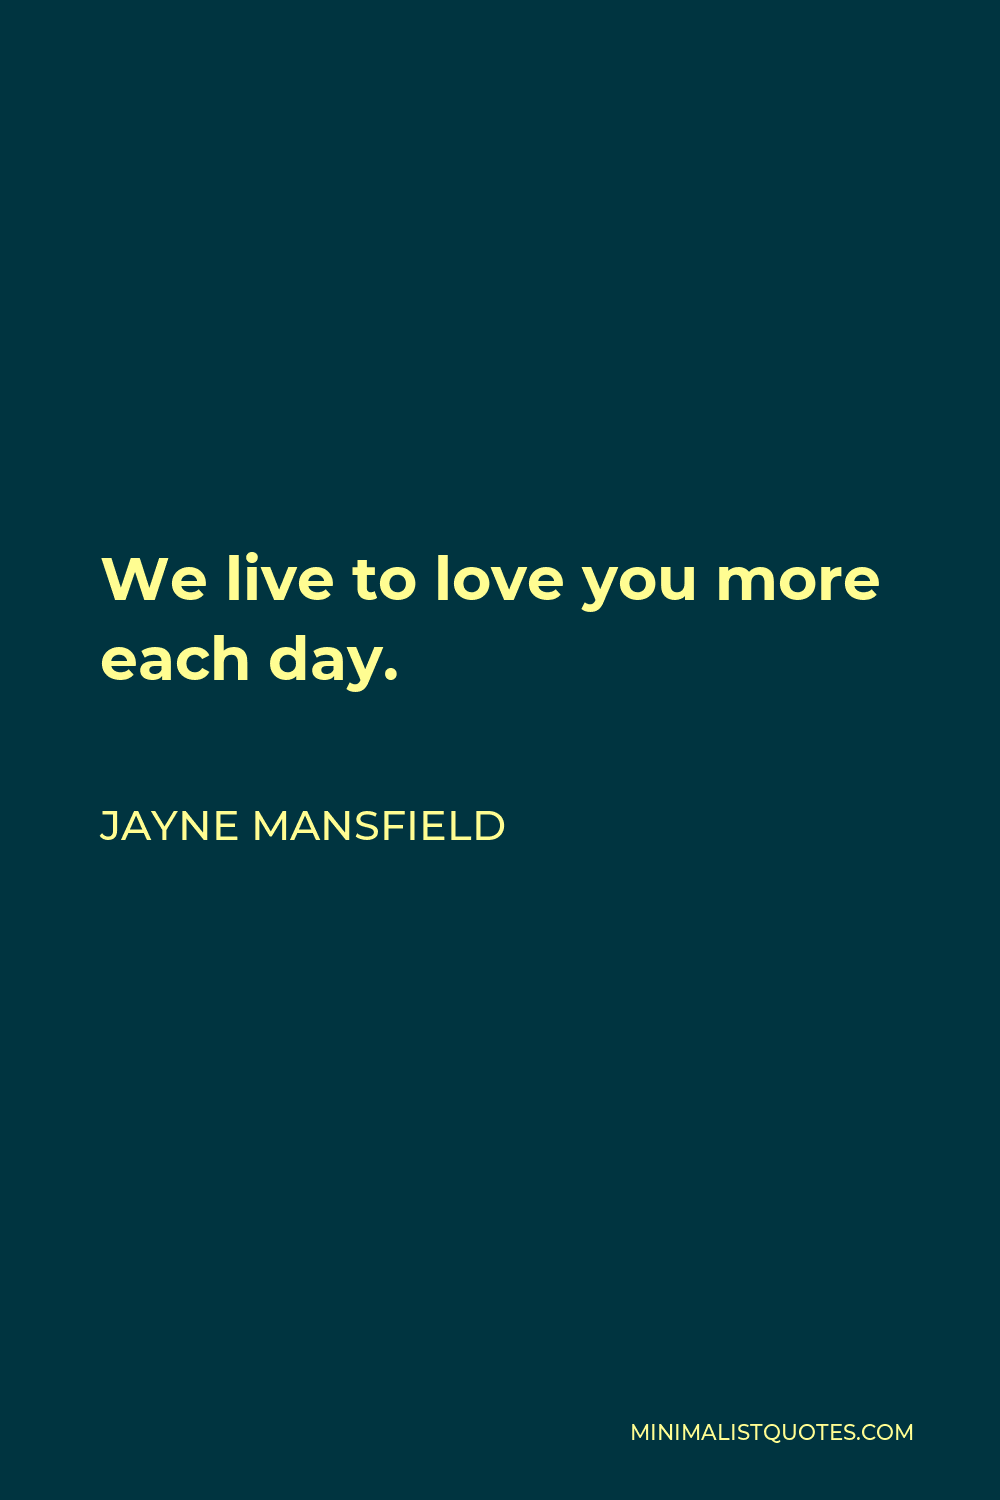 Jayne Mansfield Quote - We live to love you more each day.